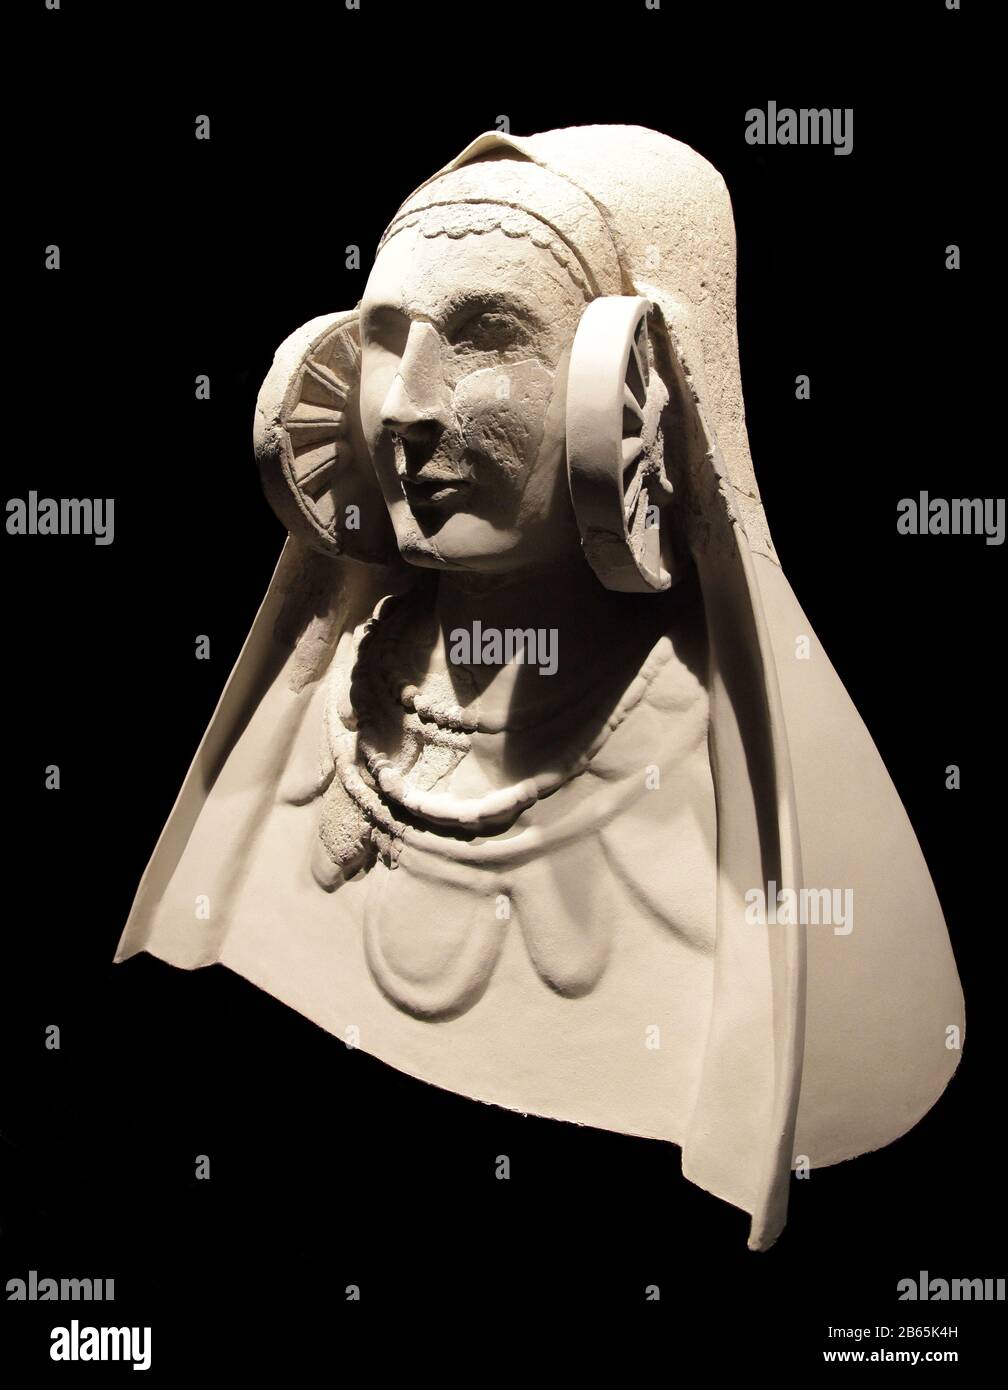 Dama de Elche,Lady of Elche,The Lady of Elche or Lady of Elx.Iberian bust.4th century BC Stock Photo